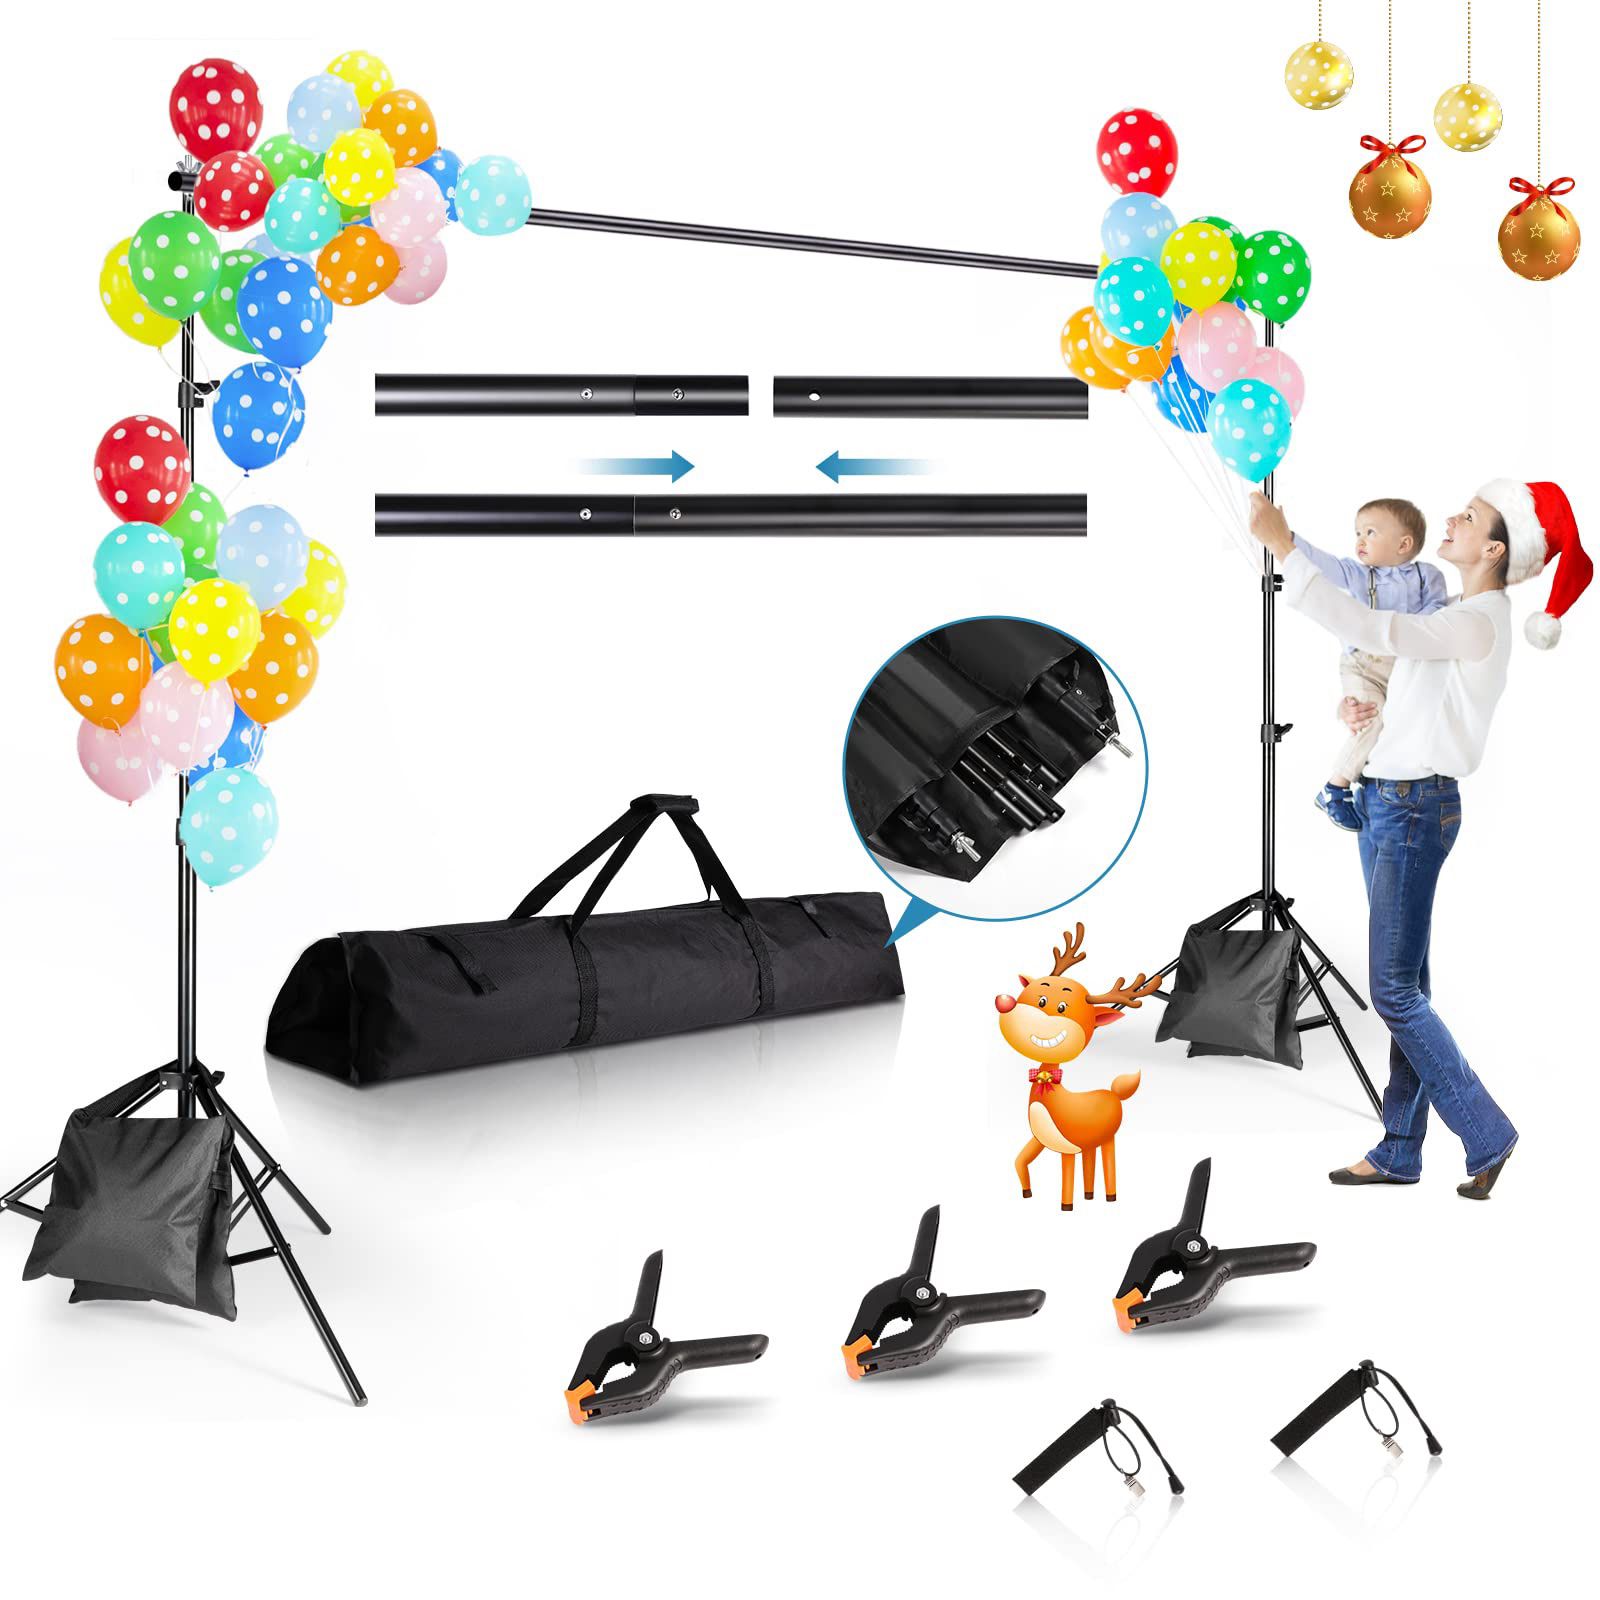 Backdrop Stand 8.5x10ft, ZBWW Photo Video Studio Adjustable Backdrop Stand For Parties, Wedding, Photography, Advertising Display 8.5*10 Ft